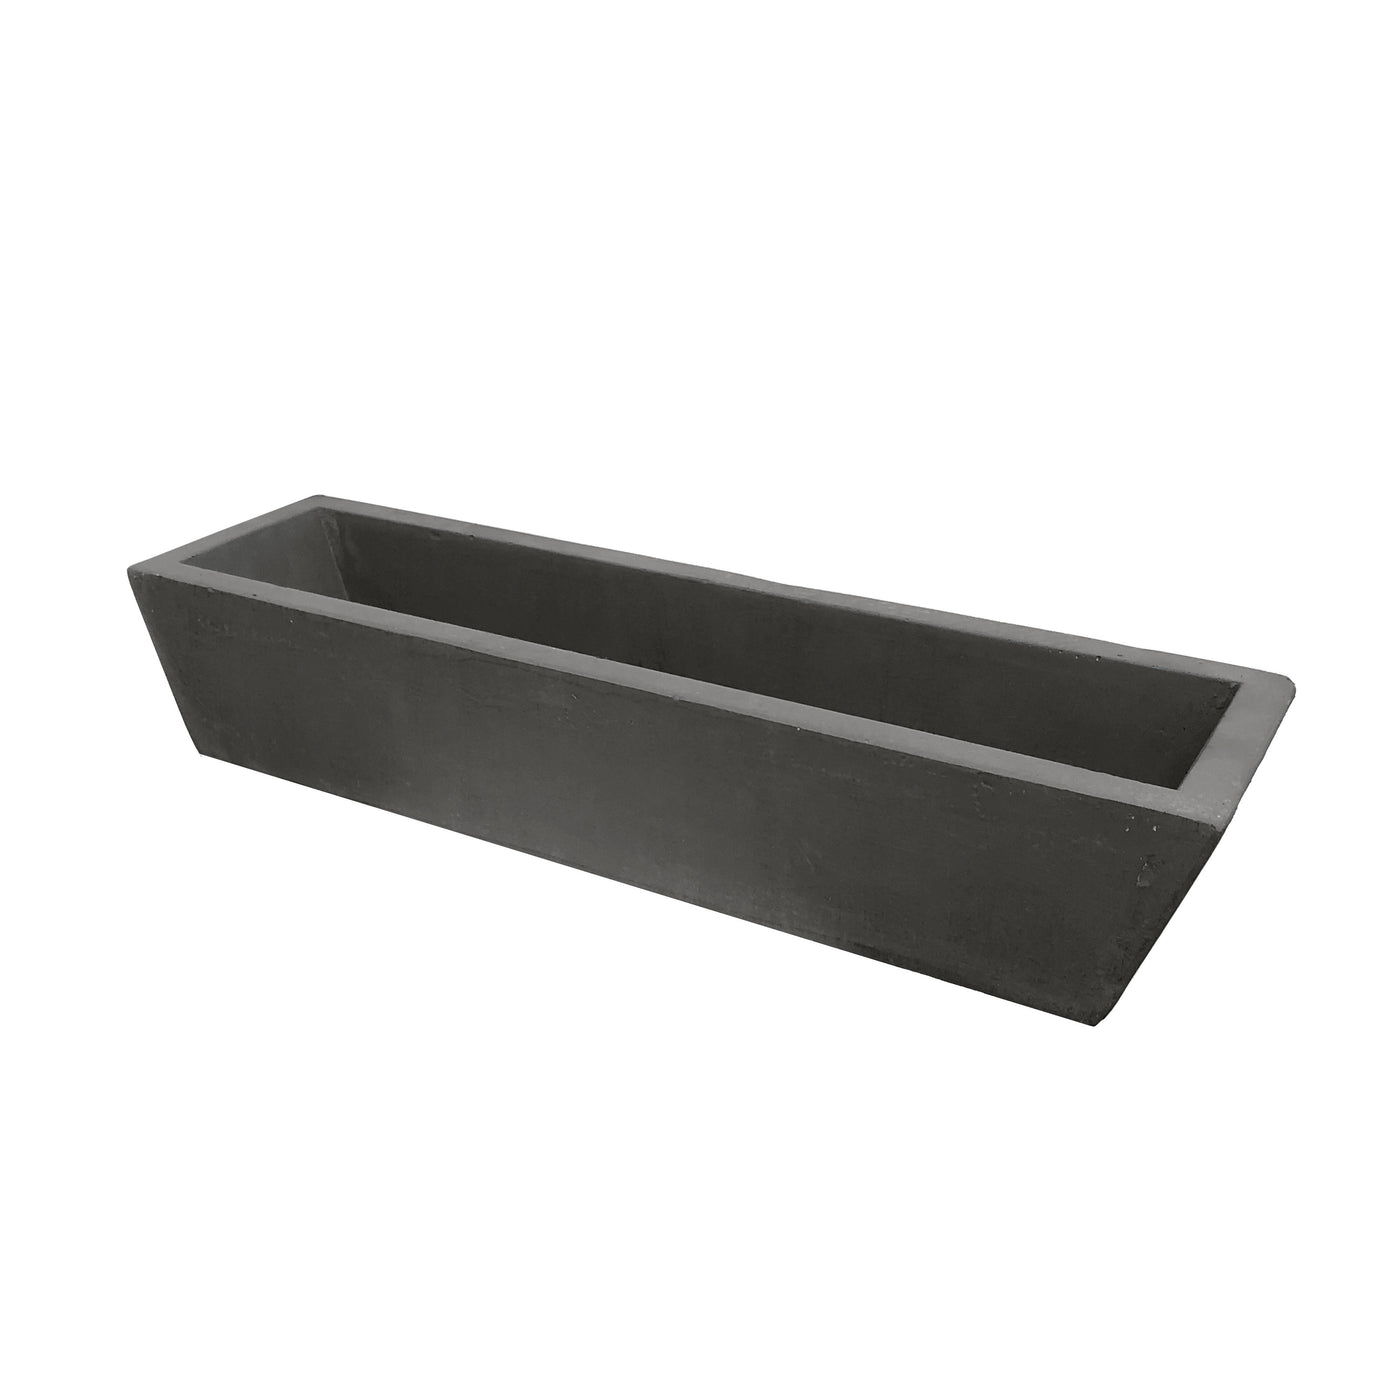 High-quality stonecast trough planter in charcoal dark gray